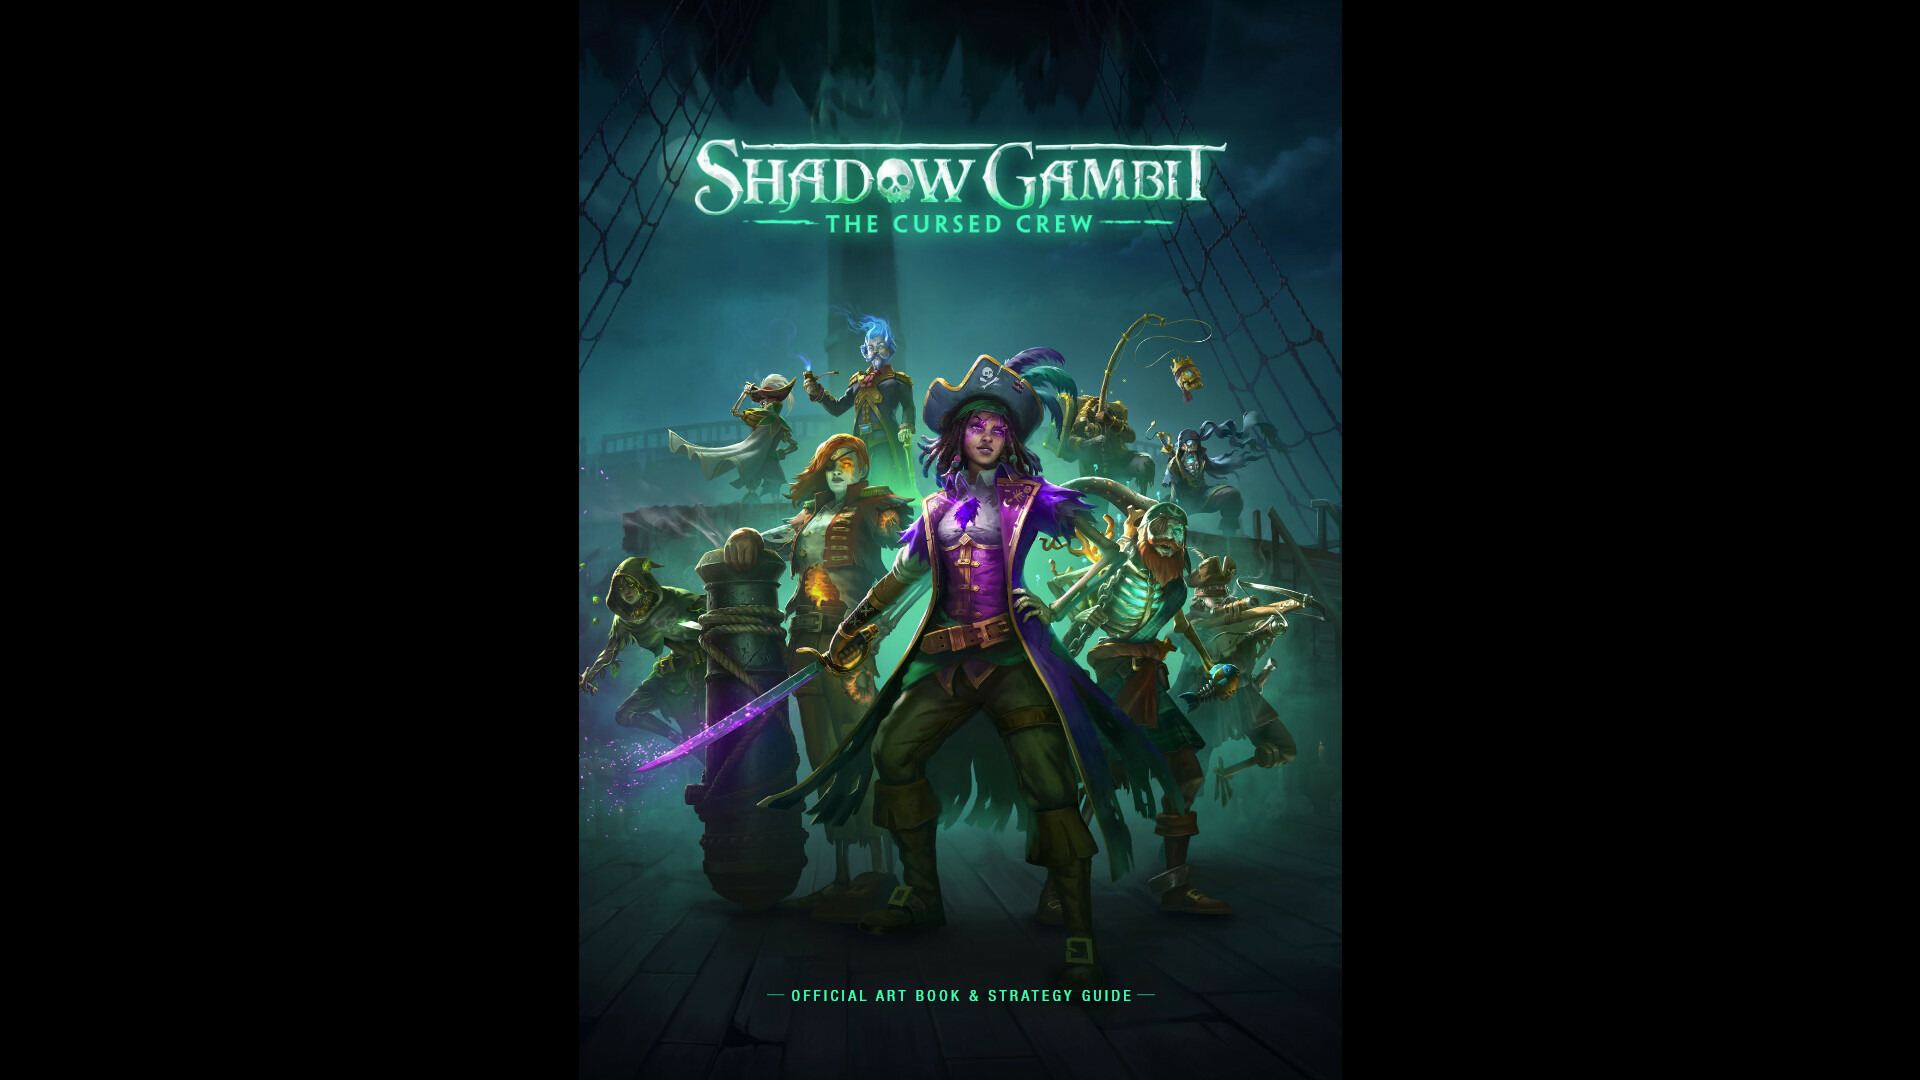 Shadow Gambit: The Cursed Crew Supporter Edition Epic Games Account, $31.53